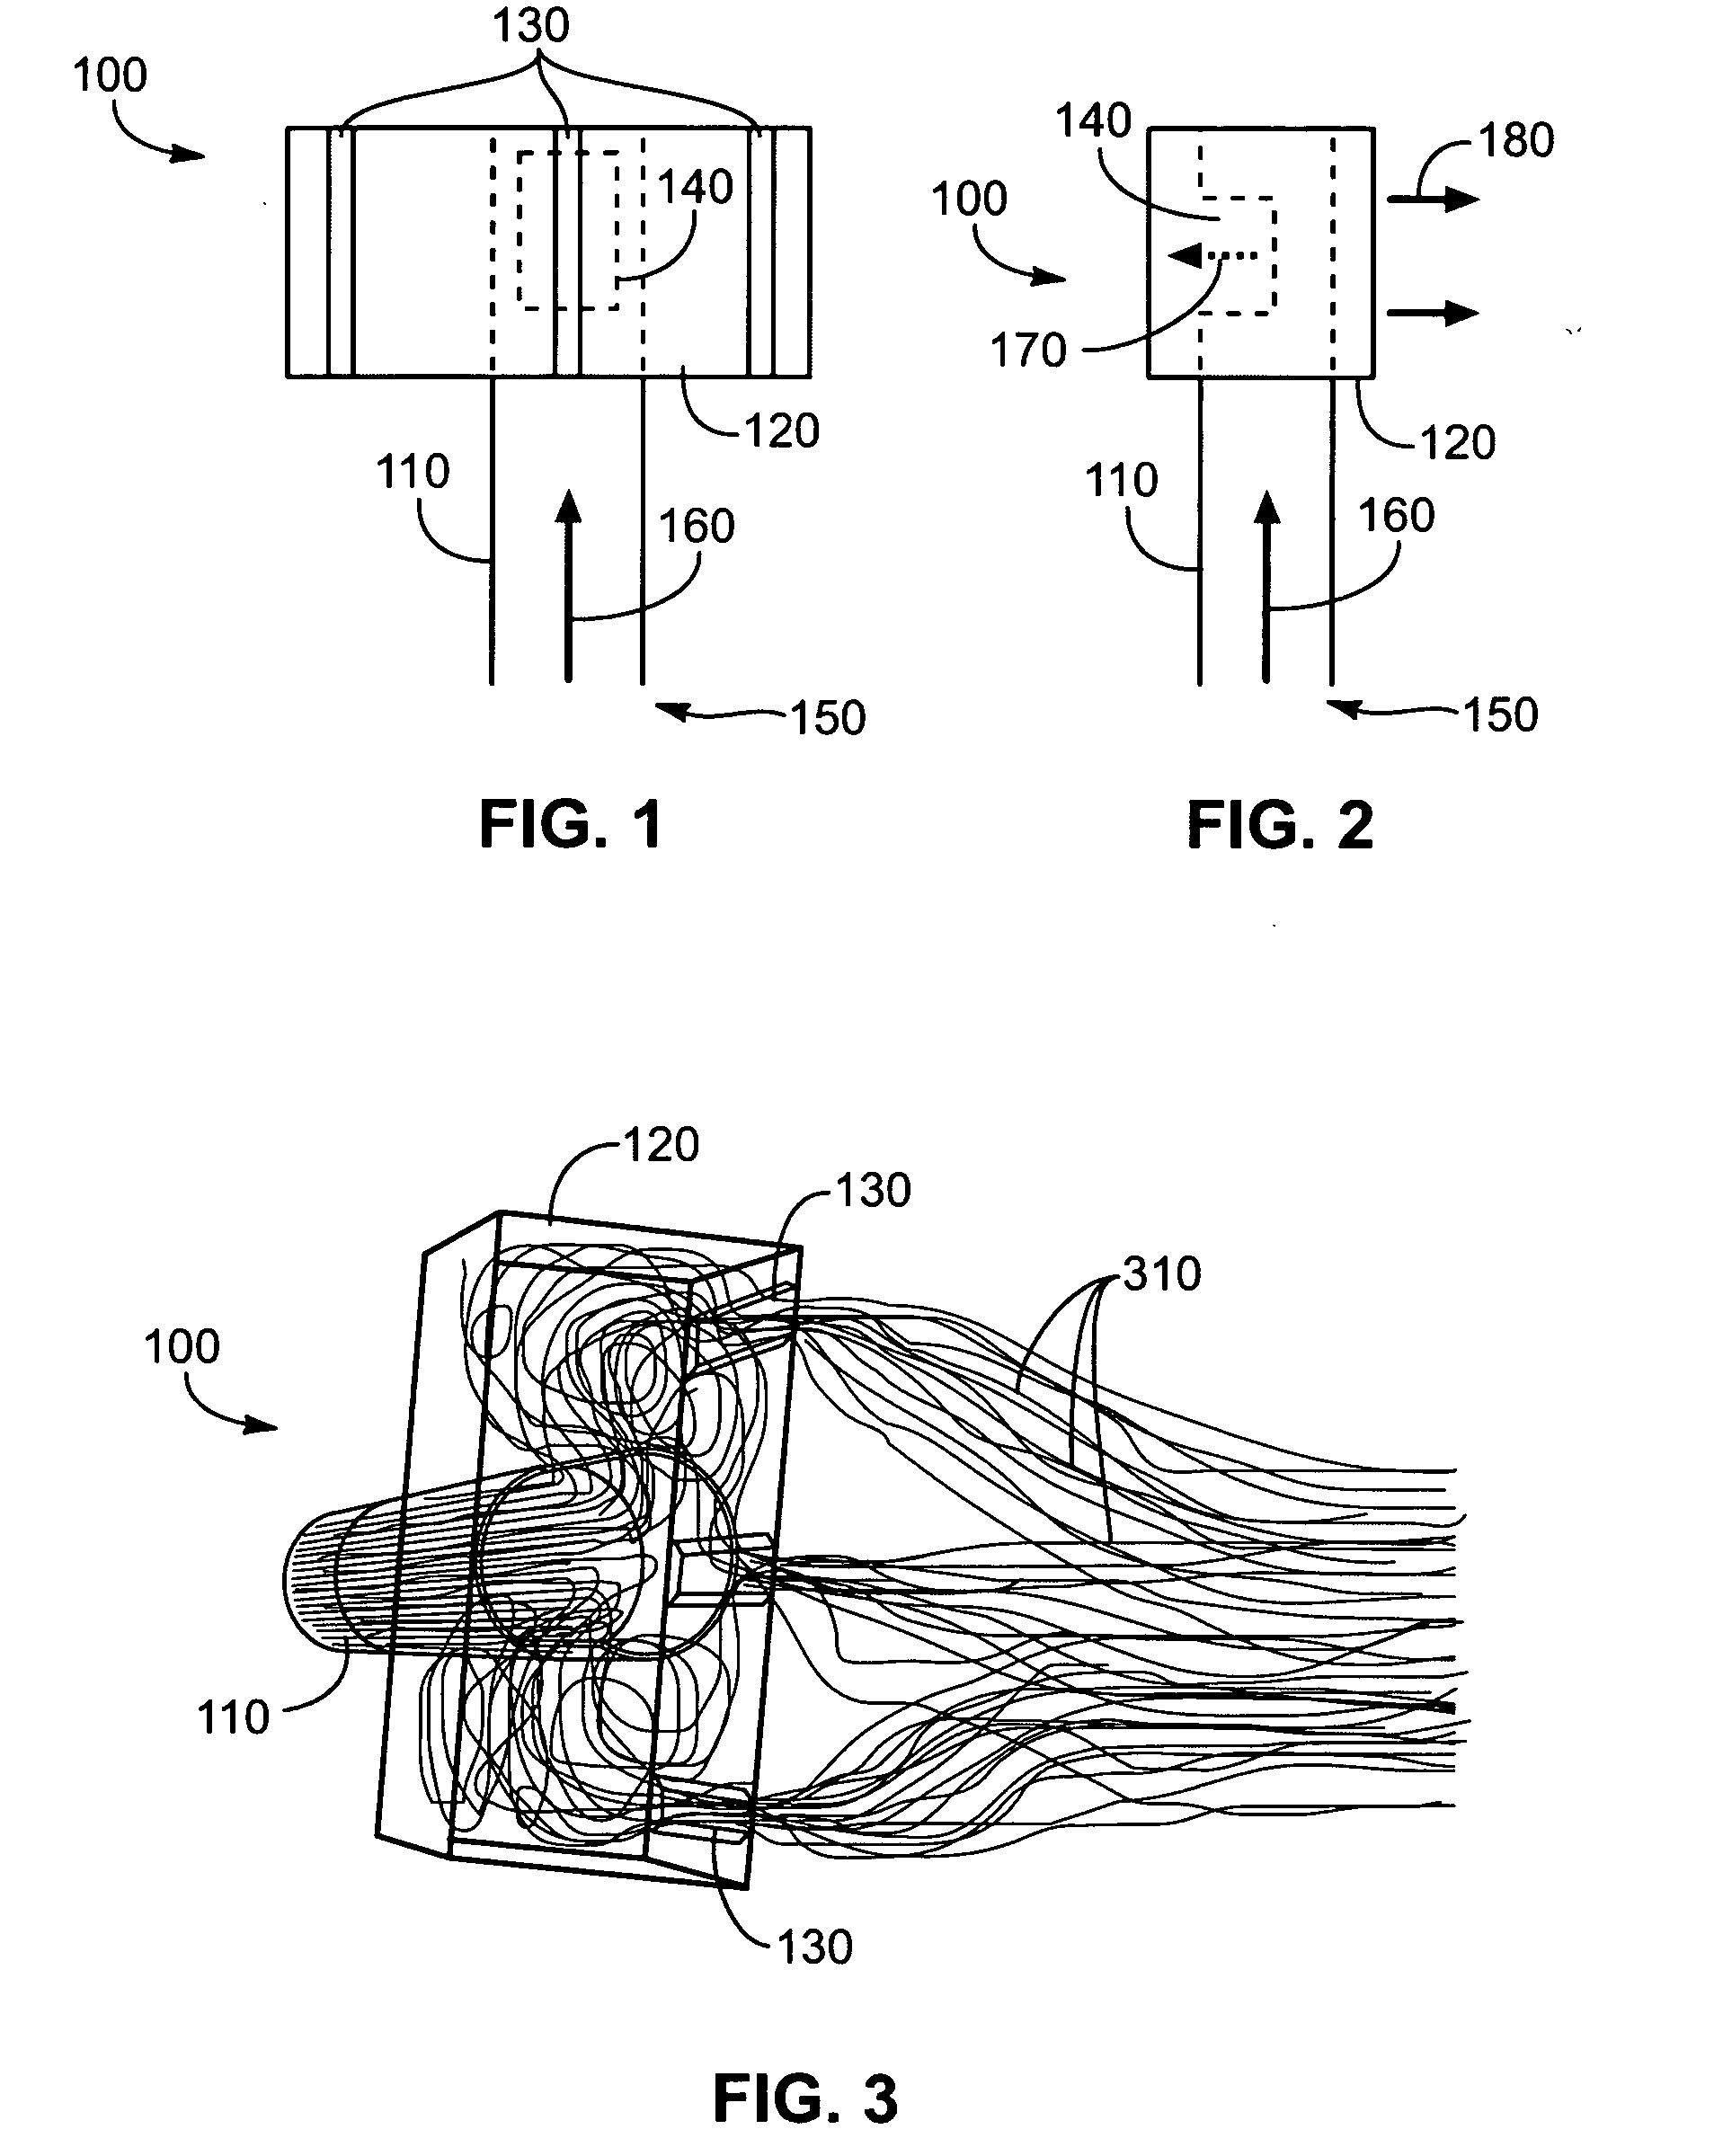 Enclosed volume exhaust diffuser apparatus, system, and method